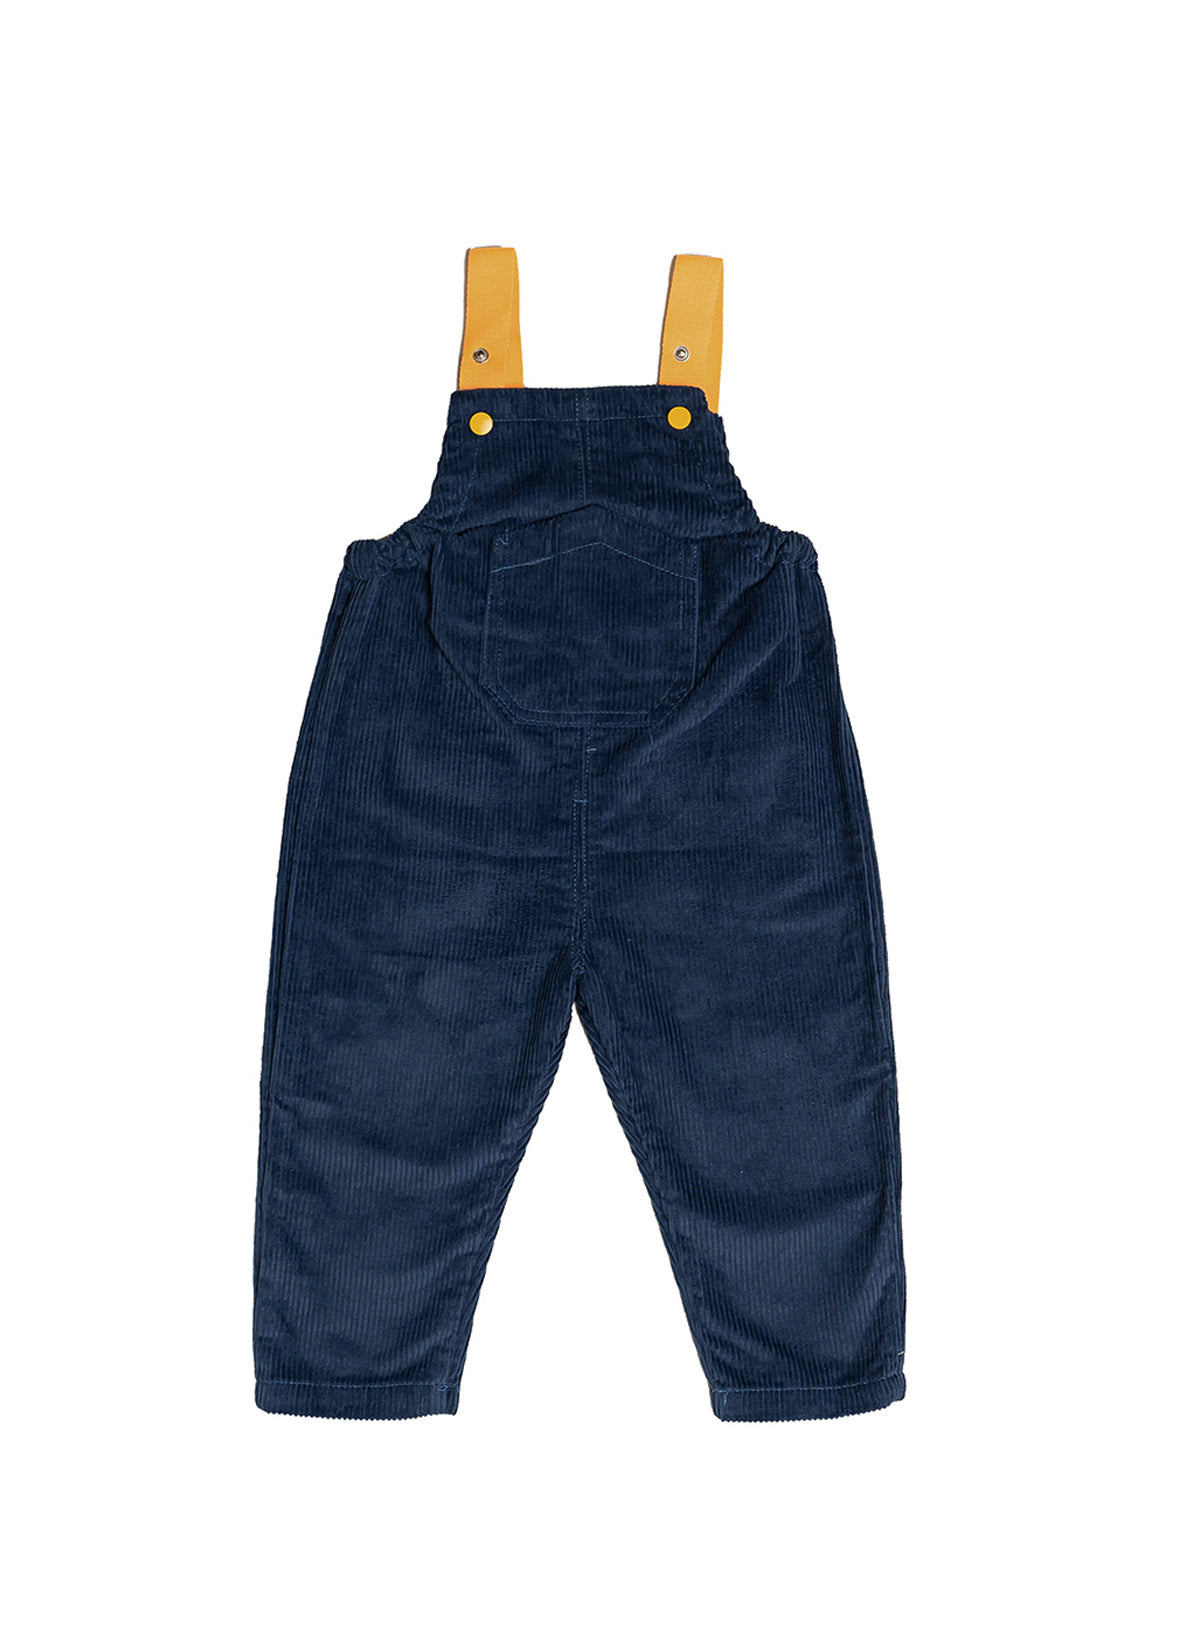 space blue corduroy overall